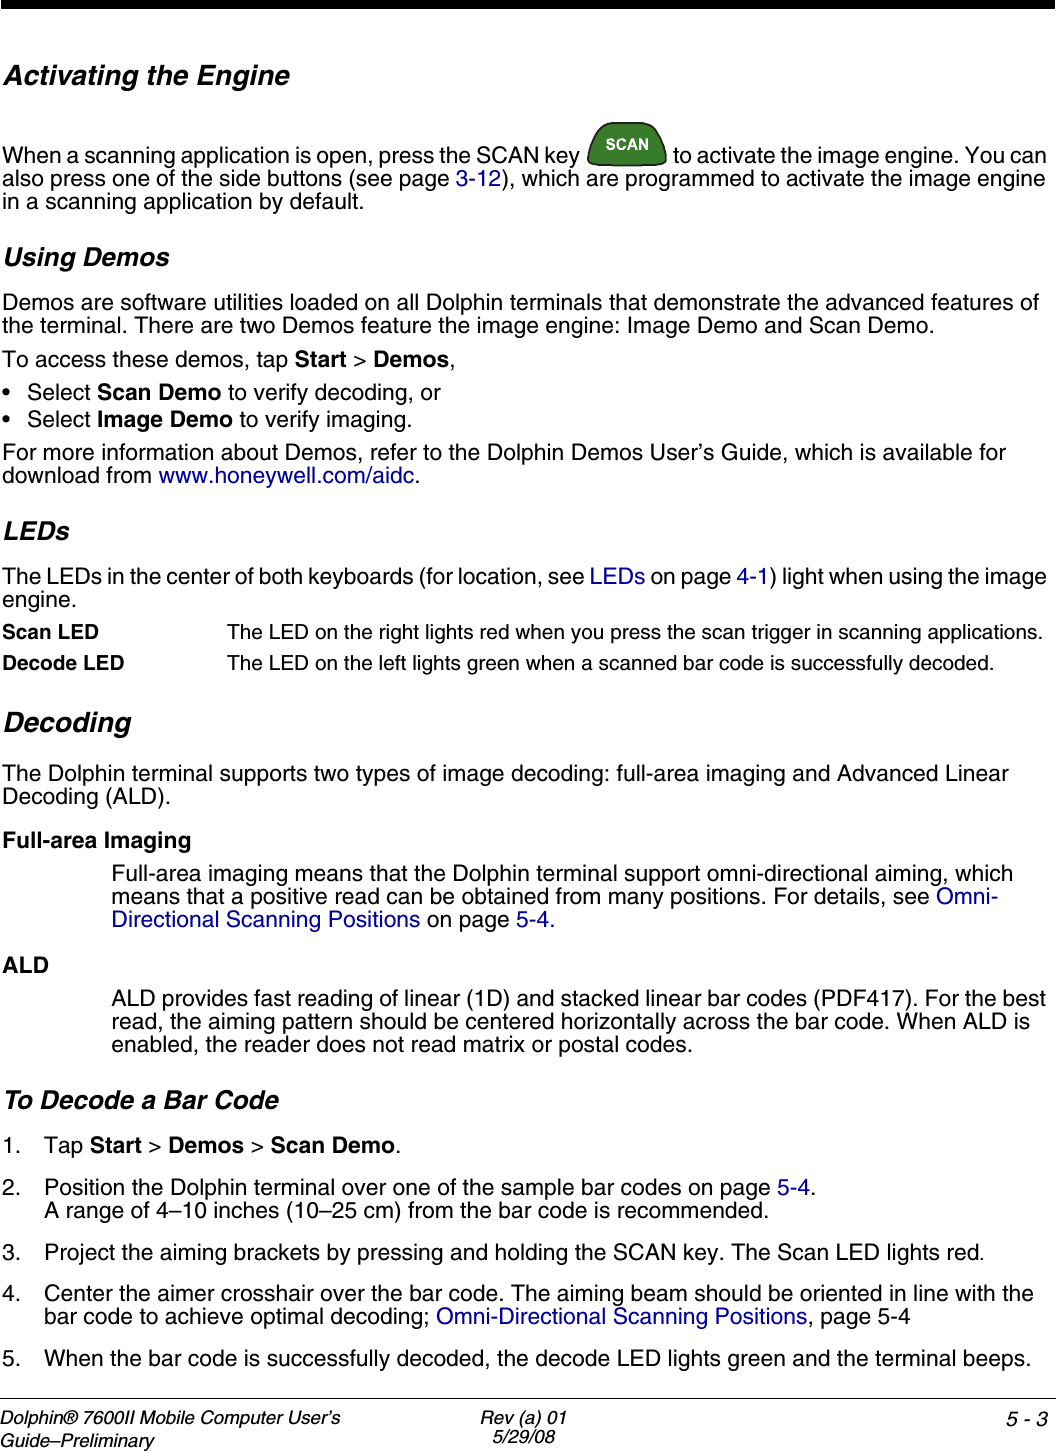 Dolphin® 7600II Mobile Computer User’s Guide–PreliminaryRev (a) 015/29/08 5 - 3Activating the EngineWhen a scanning application is open, press the SCAN key   to activate the image engine. You can also press one of the side buttons (see page 3-12), which are programmed to activate the image engine in a scanning application by default.Using DemosDemos are software utilities loaded on all Dolphin terminals that demonstrate the advanced features of the terminal. There are two Demos feature the image engine: Image Demo and Scan Demo.To access these demos, tap Start &gt; Demos,•Select Scan Demo to verify decoding, or•Select Image Demo to verify imaging.For more information about Demos, refer to the Dolphin Demos User’s Guide, which is available for download from www.honeywell.com/aidc.LEDsThe LEDs in the center of both keyboards (for location, see LEDs on page 4-1) light when using the image engine.Scan LED  The LED on the right lights red when you press the scan trigger in scanning applications.Decode LED  The LED on the left lights green when a scanned bar code is successfully decoded.DecodingThe Dolphin terminal supports two types of image decoding: full-area imaging and Advanced Linear Decoding (ALD).Full-area ImagingFull-area imaging means that the Dolphin terminal support omni-directional aiming, which means that a positive read can be obtained from many positions. For details, see Omni-Directional Scanning Positions on page 5-4. ALDALD provides fast reading of linear (1D) and stacked linear bar codes (PDF417). For the best read, the aiming pattern should be centered horizontally across the bar code. When ALD is enabled, the reader does not read matrix or postal codes.To Decode a Bar Code1. Tap Start &gt; Demos &gt; Scan Demo.2. Position the Dolphin terminal over one of the sample bar codes on page 5-4.A range of 4–10 inches (10–25 cm) from the bar code is recommended. 3. Project the aiming brackets by pressing and holding the SCAN key. The Scan LED lights red.4. Center the aimer crosshair over the bar code. The aiming beam should be oriented in line with the bar code to achieve optimal decoding; Omni-Directional Scanning Positions, page 5-45. When the bar code is successfully decoded, the decode LED lights green and the terminal beeps.